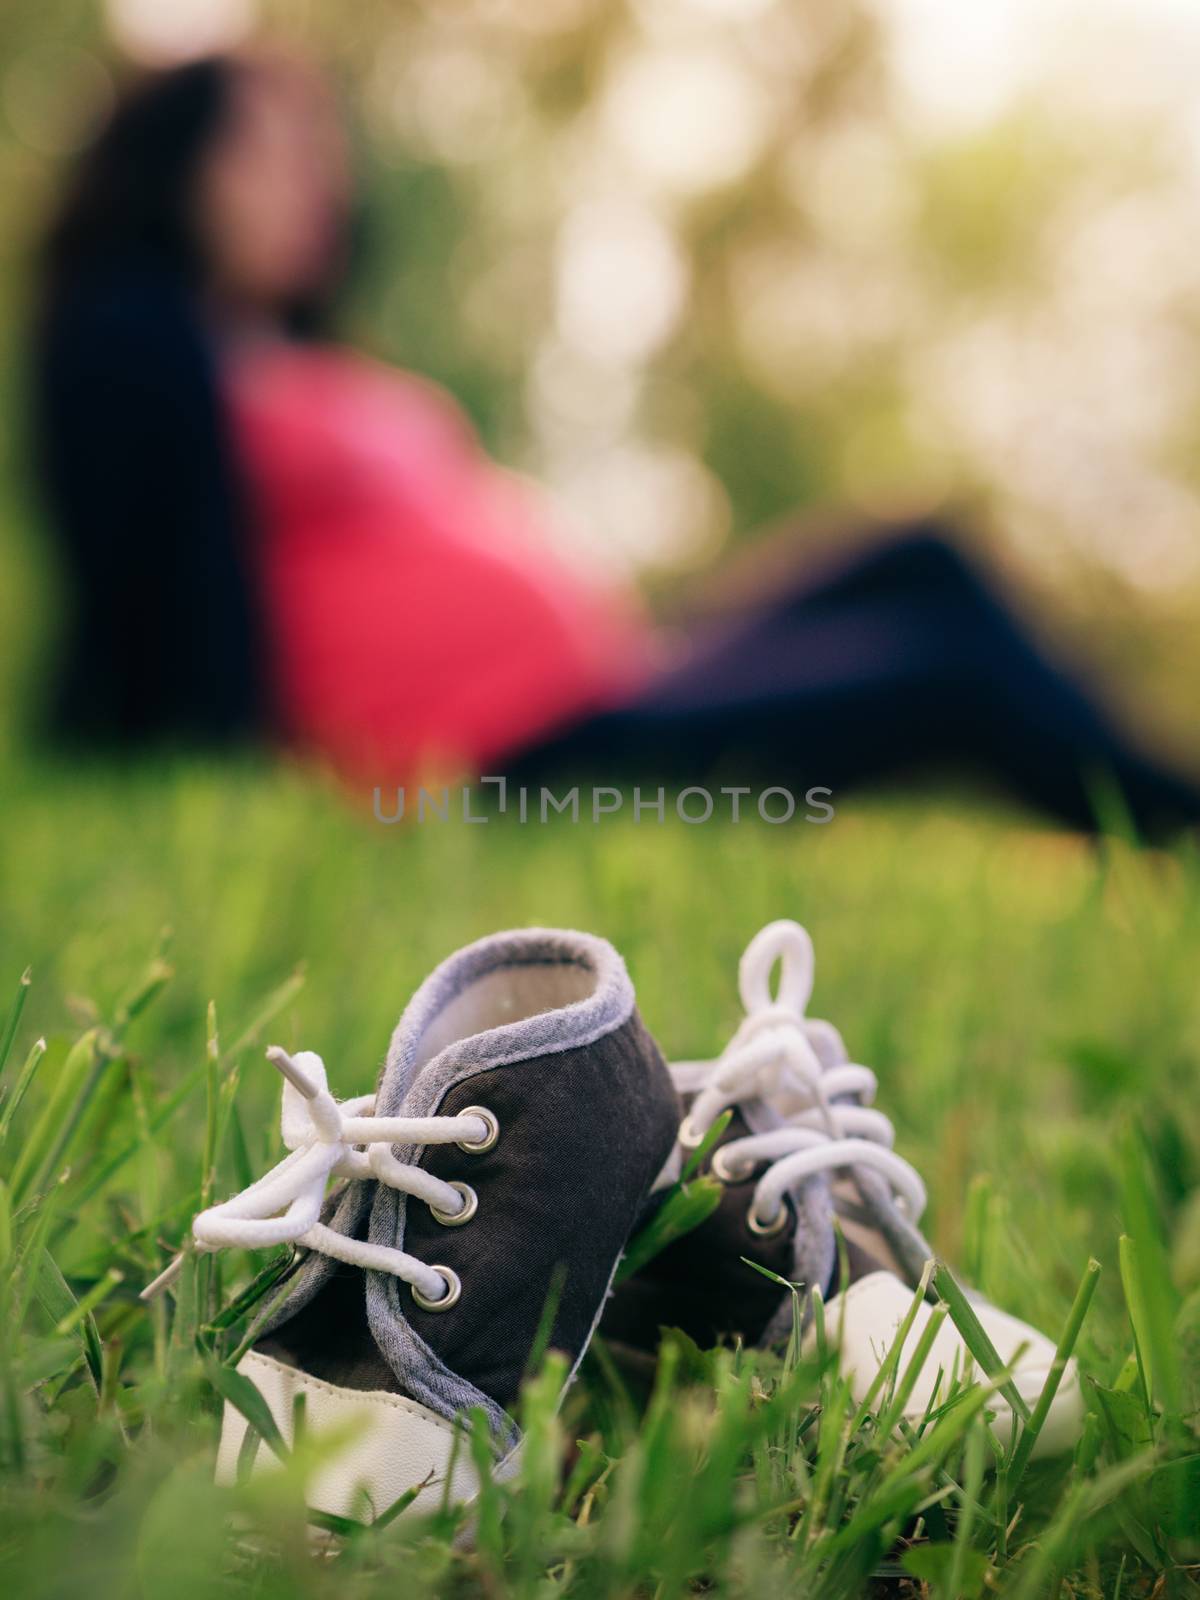 Close up view of little children shoes in grass and blurred silhouette of pregnant woman on background. Shallow DOF, focus on foreground. Pregnancy concept. Copy space. Vertical.